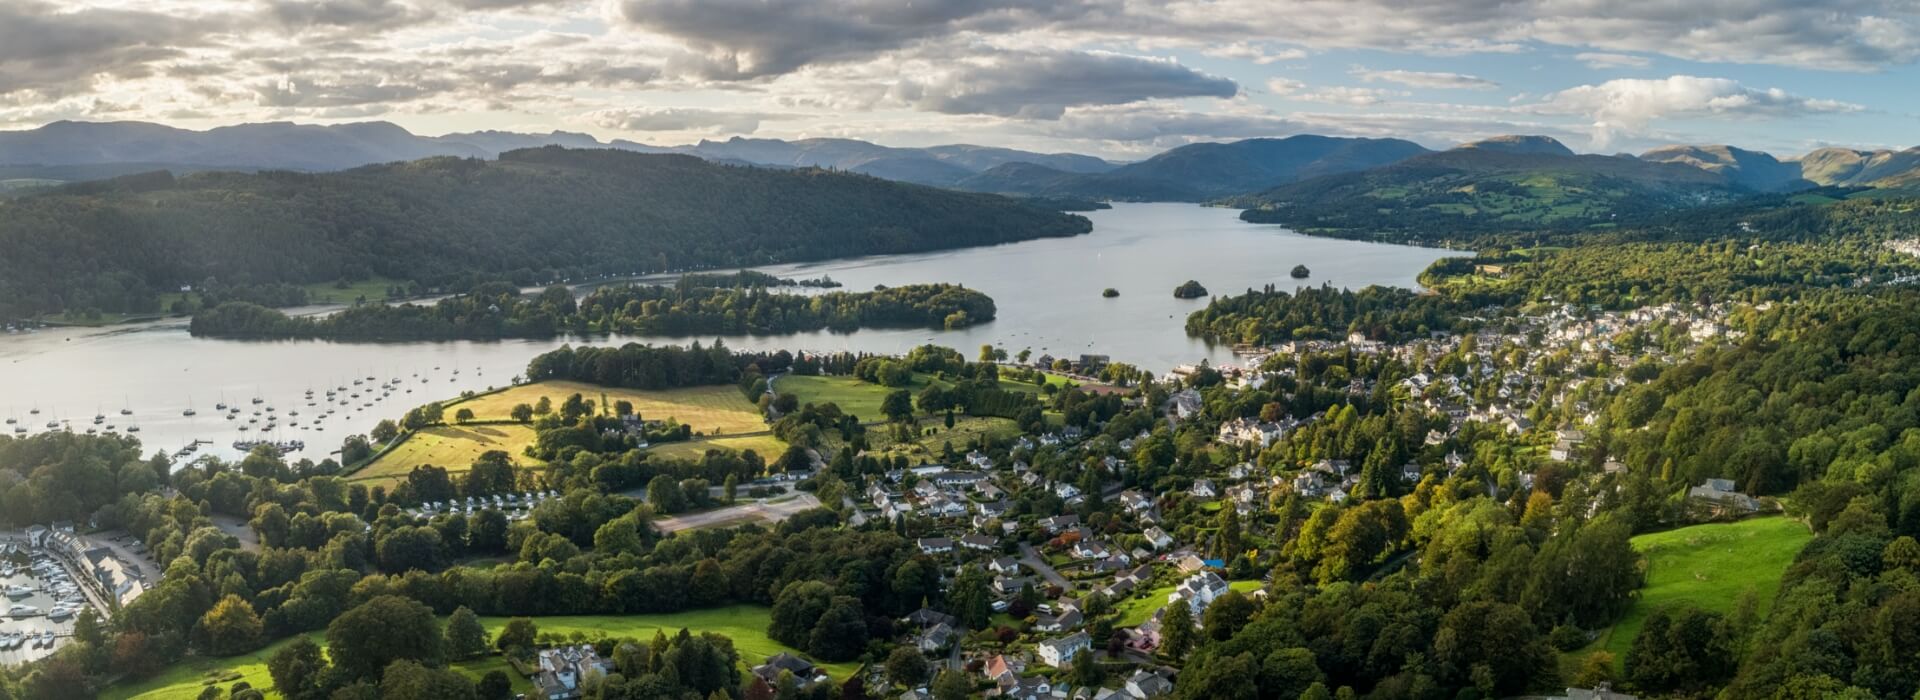 Leeucollection blog - A world that only exists in Windermere hero slide 1